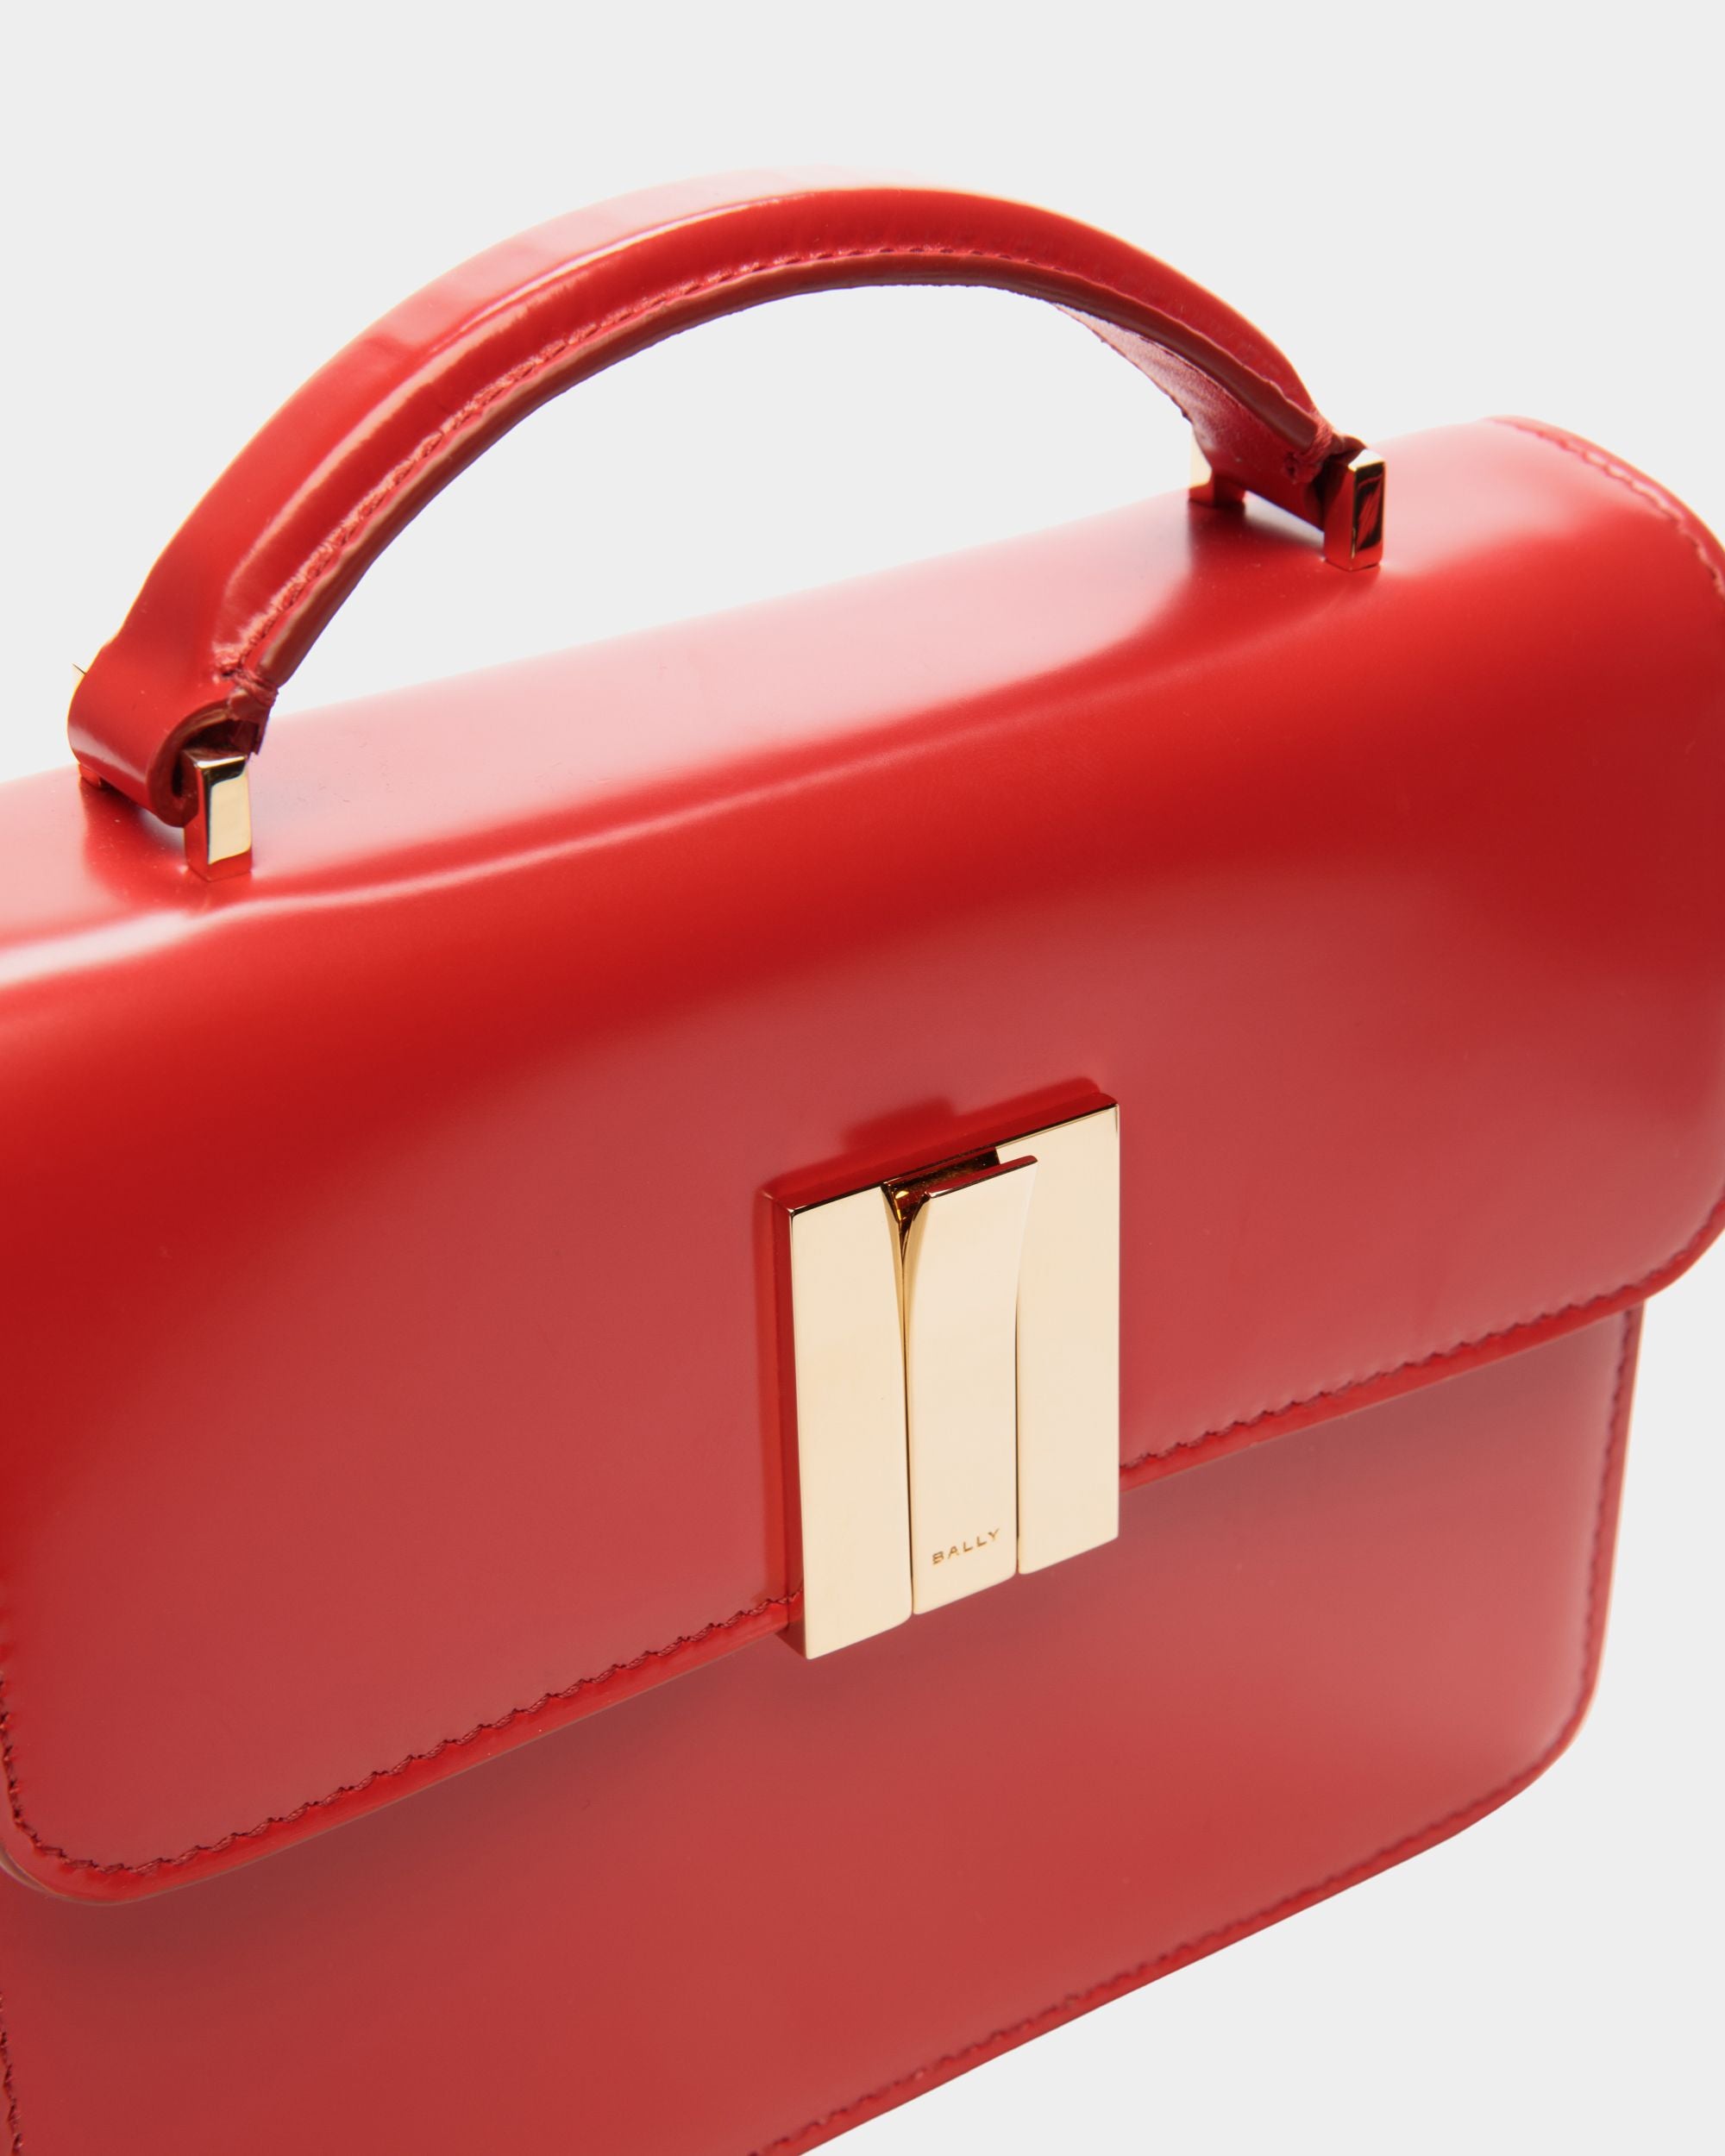 Women's Ollam Mini Top Handle Bag in Candy Red Brushed Leather | Bally | Still Life Detail